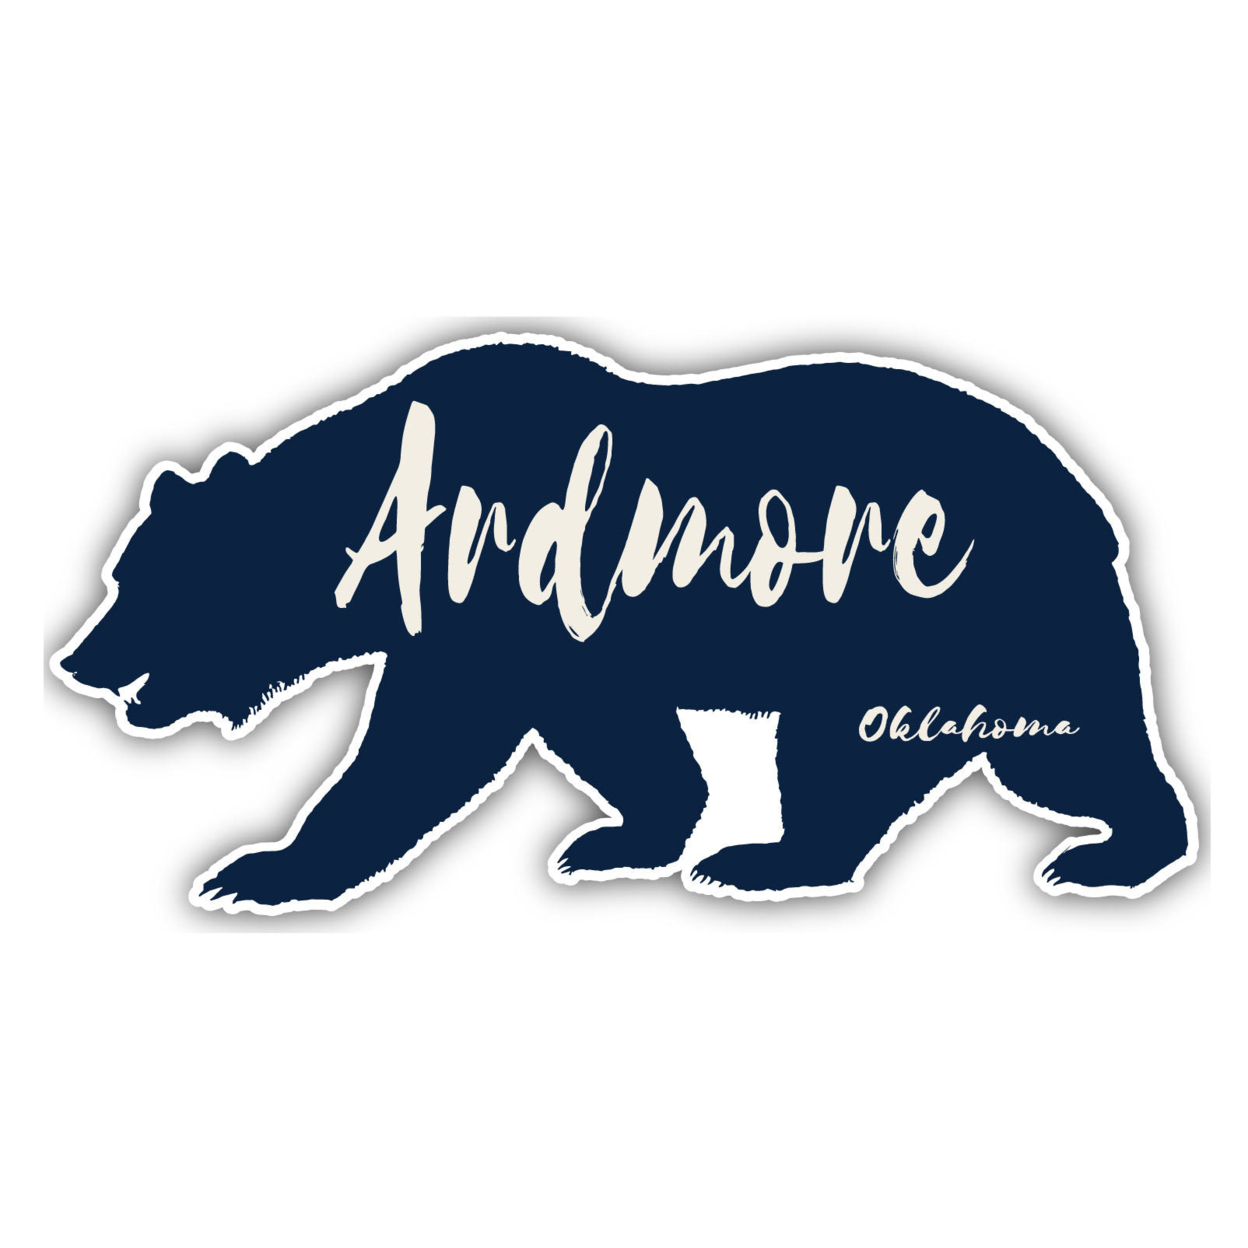 Ardmore Oklahoma Souvenir Decorative Stickers (Choose Theme And Size) - 4-Pack, 6-Inch, Bear